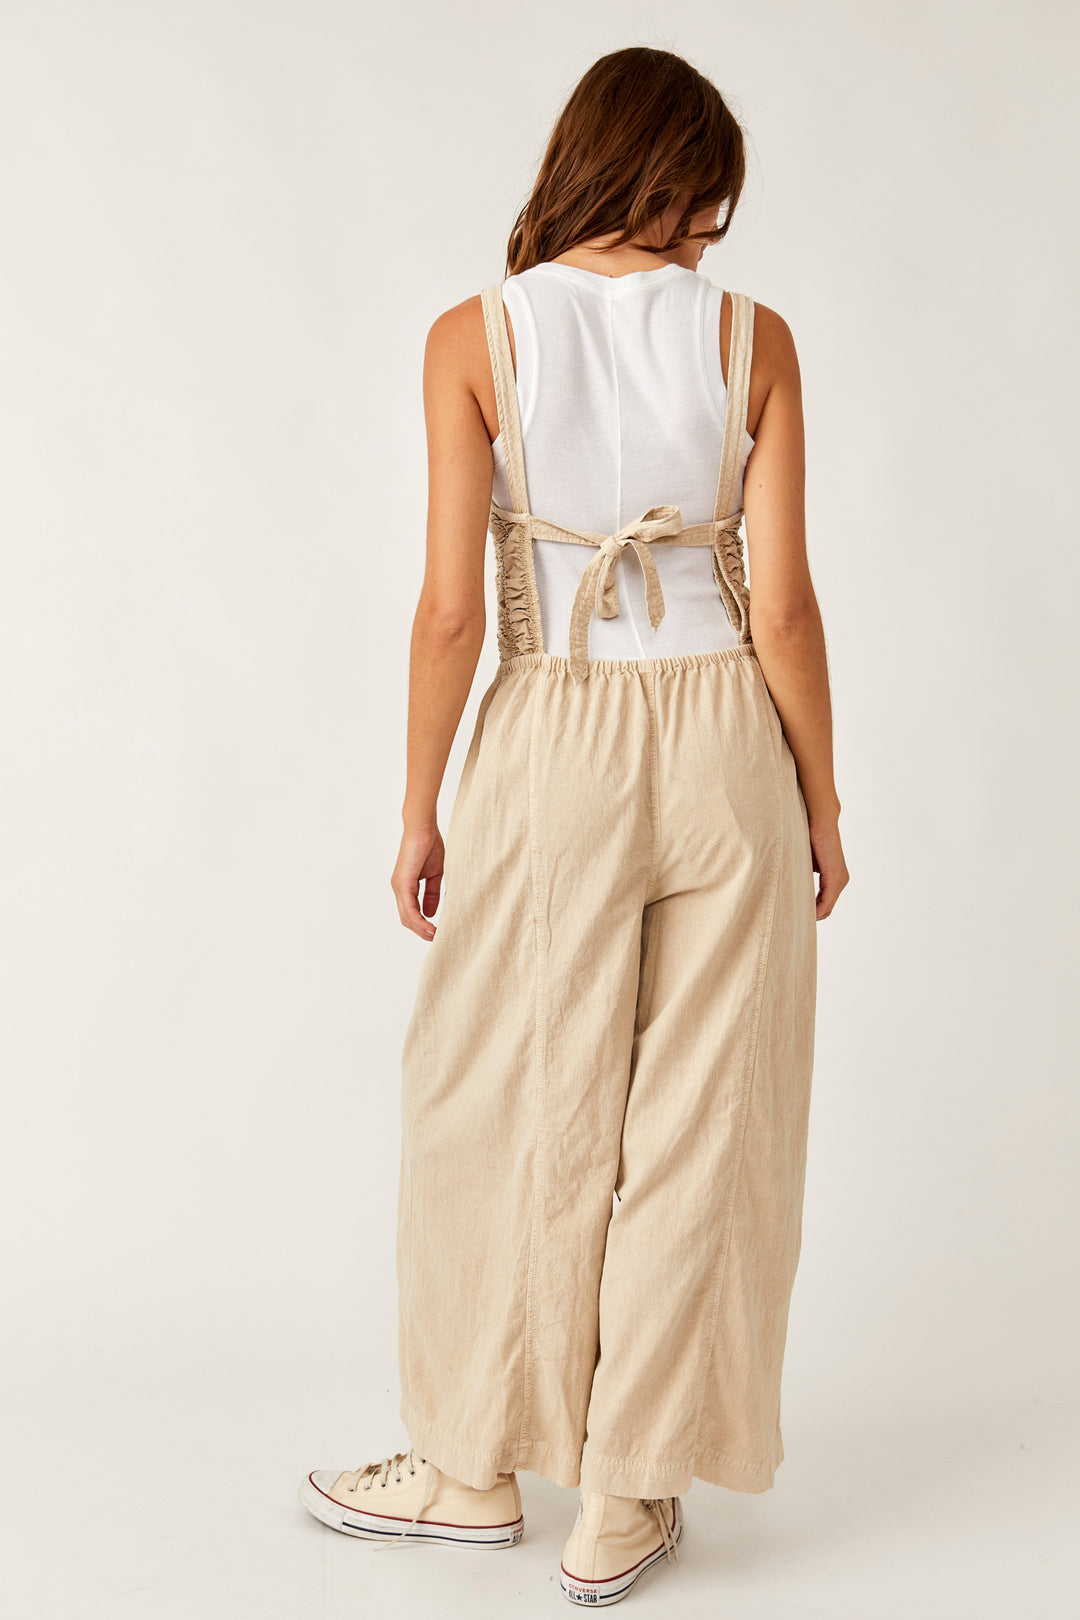 Free People Forever Always Ruched Onesie in Bleached Sand